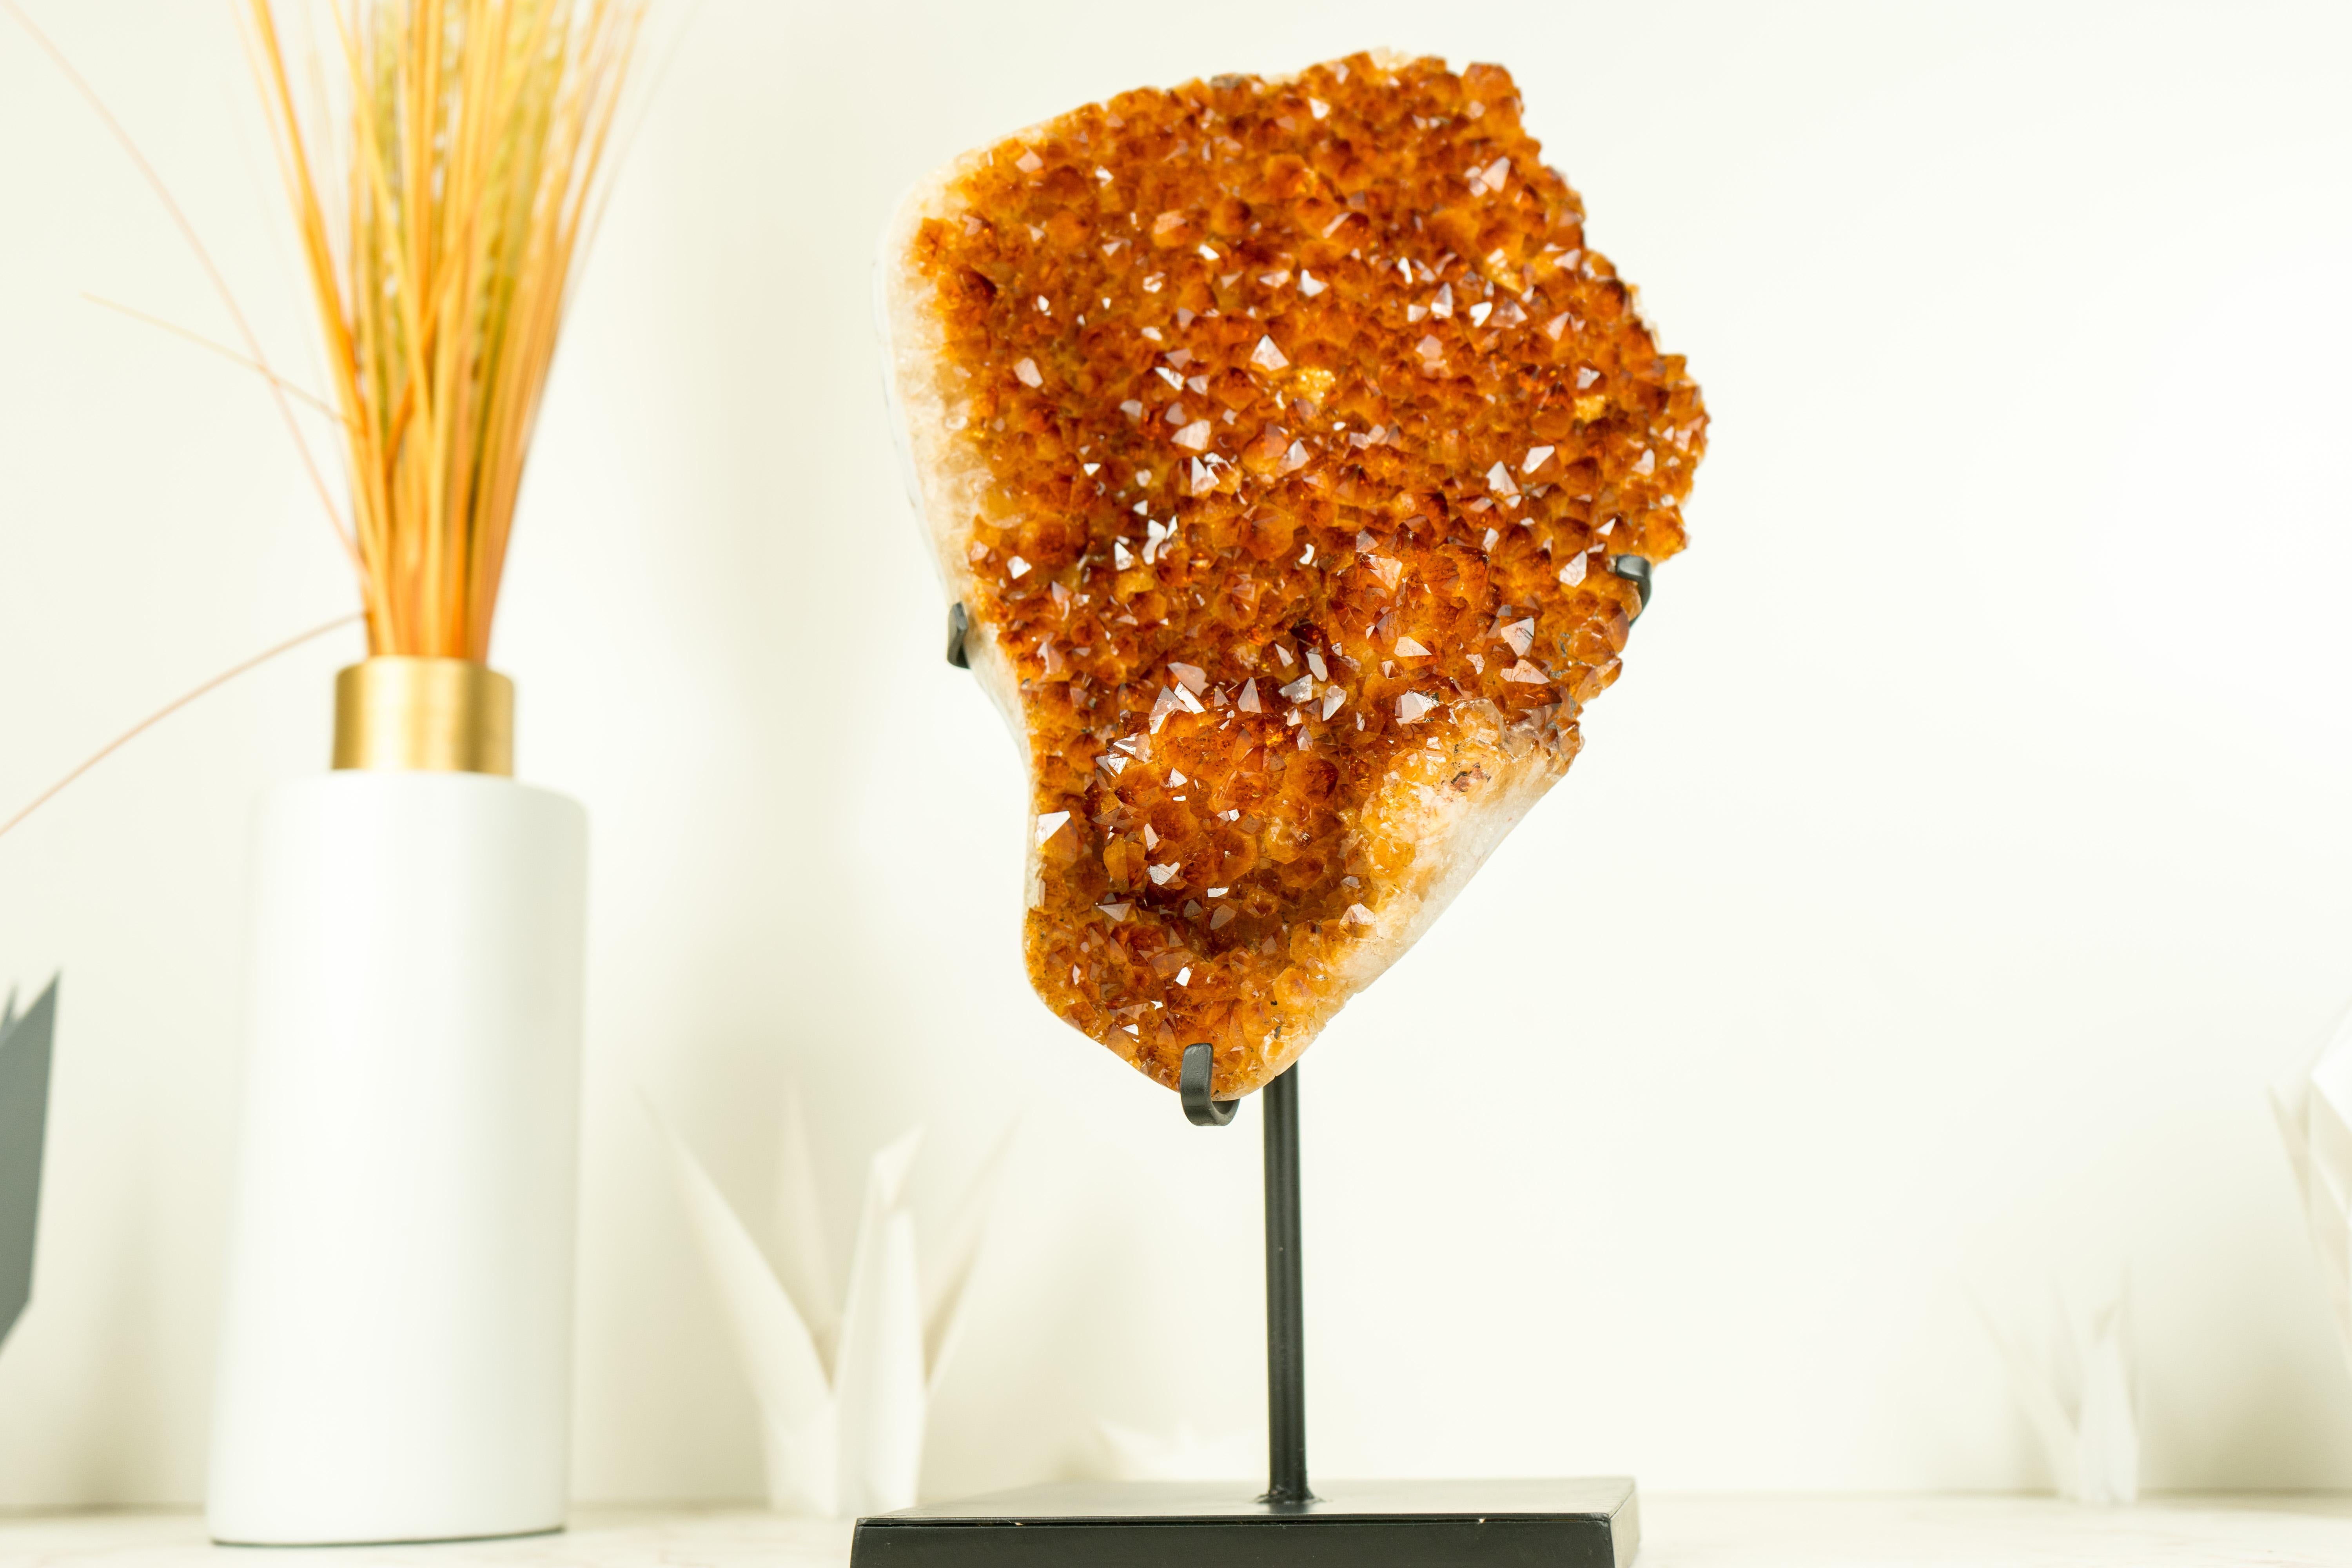 A rare and gorgeous cluster of Citrine, this specimen brings the rare and beautiful Orange Madeira Citrine as well as a natural Flower formation that adorns the aesthetics of this Specimen. Certainly, this Citrine specimen is destined to become the